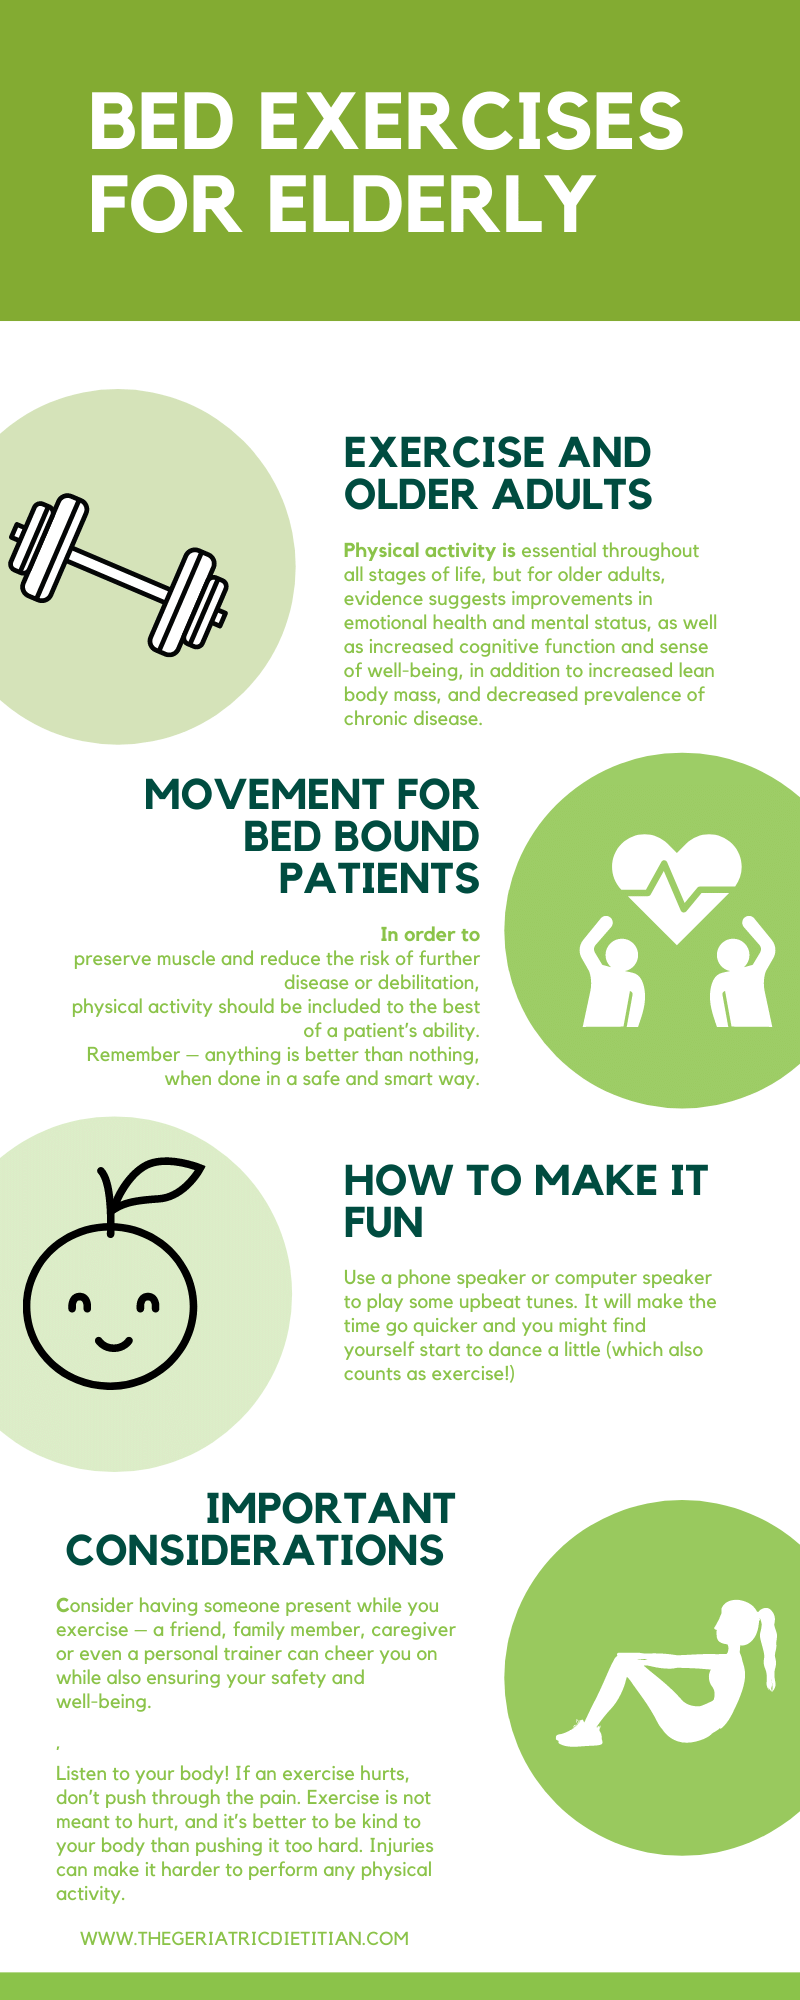 https://thegeriatricdietitian.com/wp-content/uploads/2020/10/Bed-Exercises-for-Elderly-Infographic.png